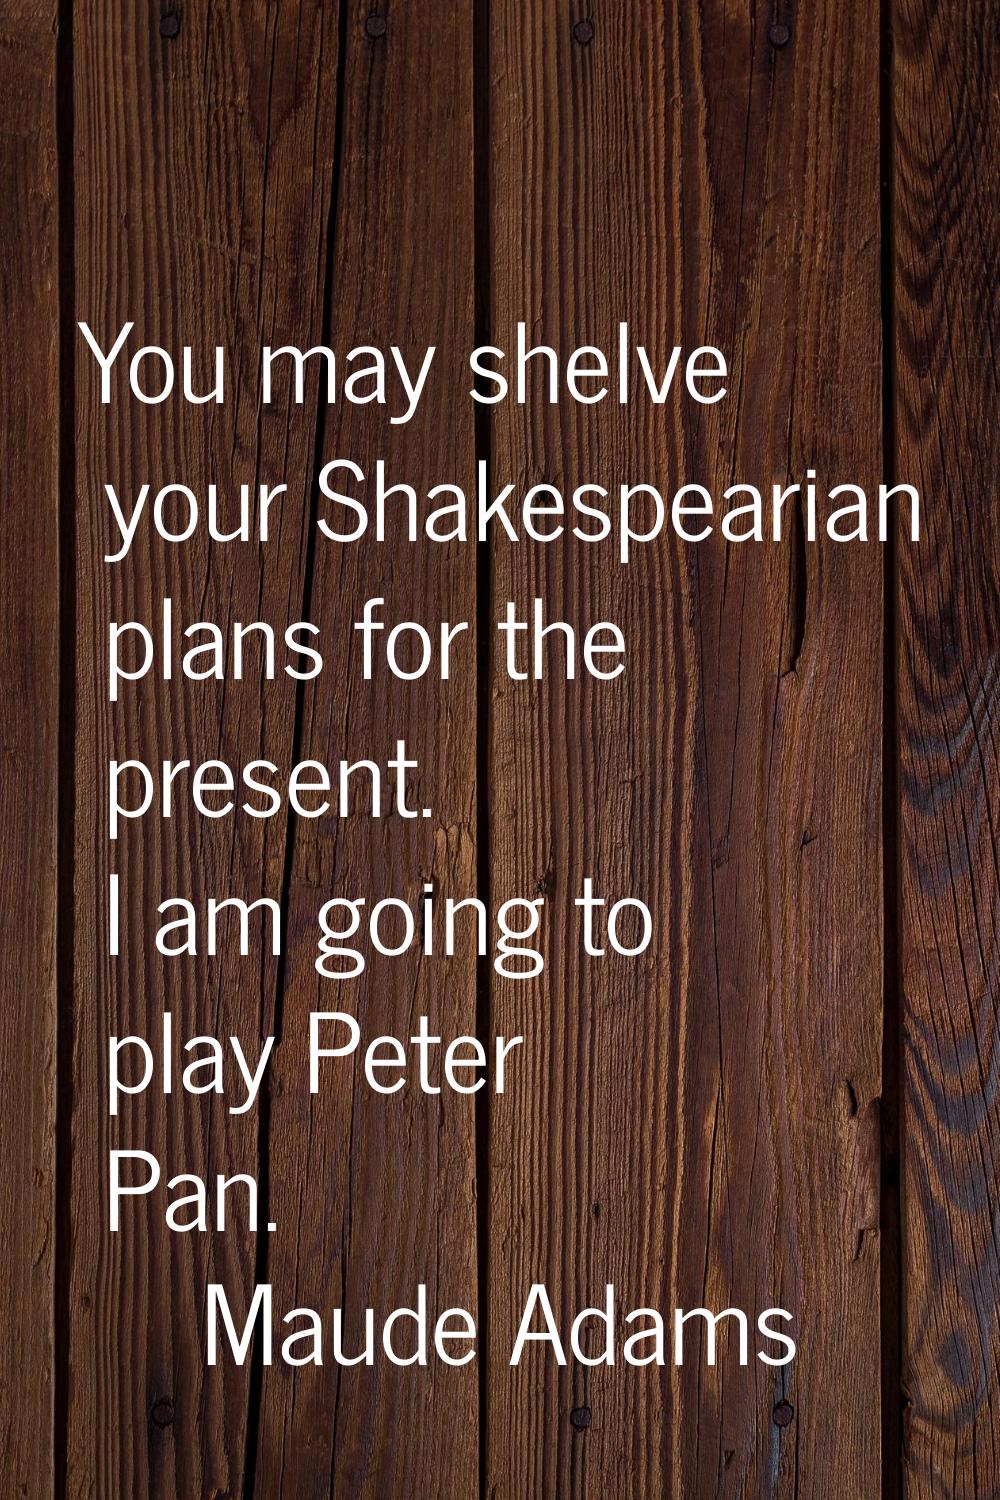 You may shelve your Shakespearian plans for the present. I am going to play Peter Pan.